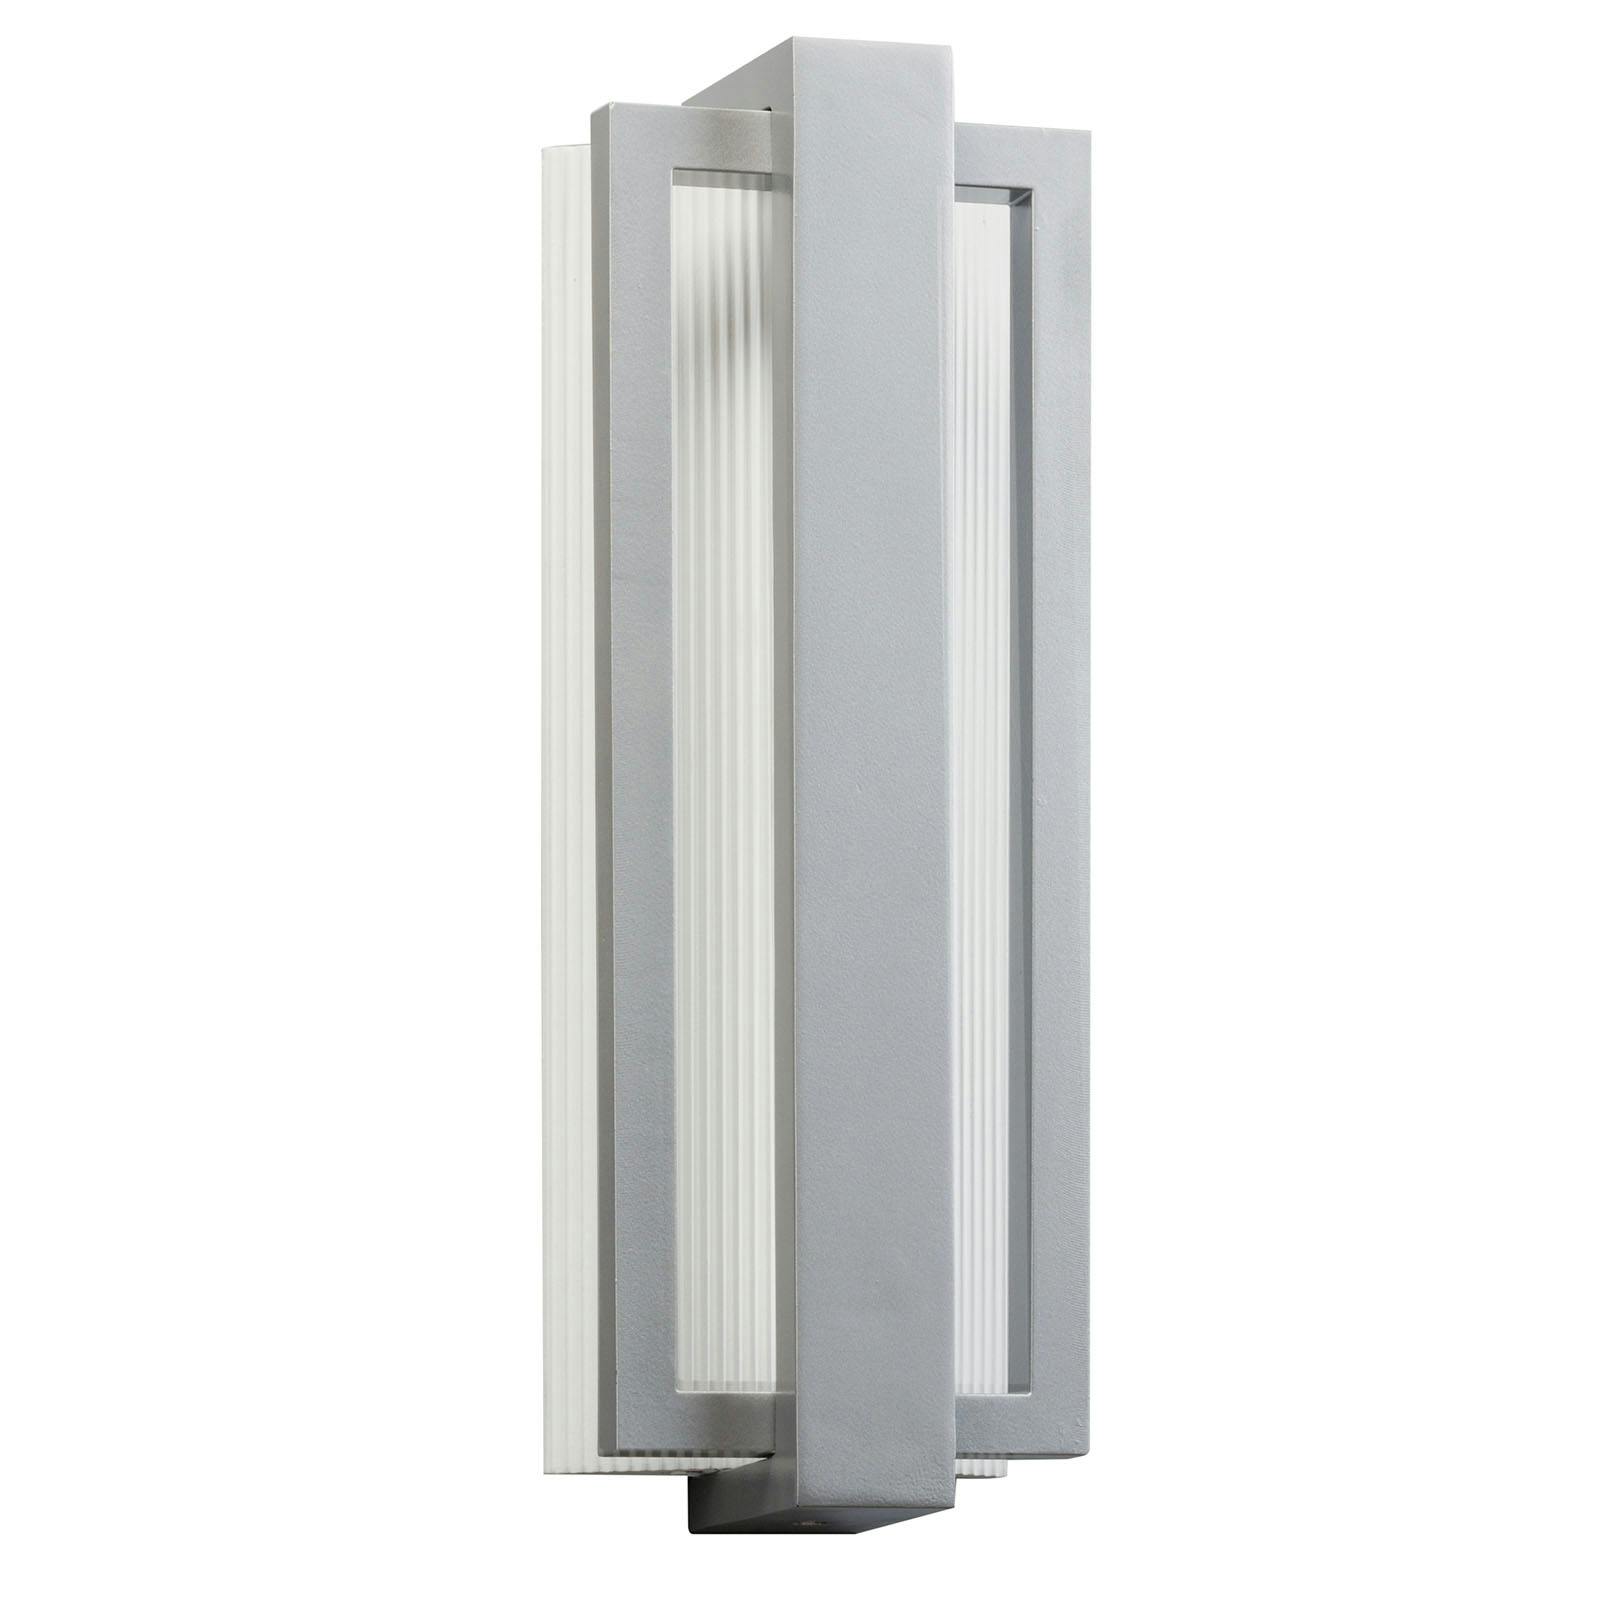 Sedo 18.25" LED Wall Light in Platinum on a white background